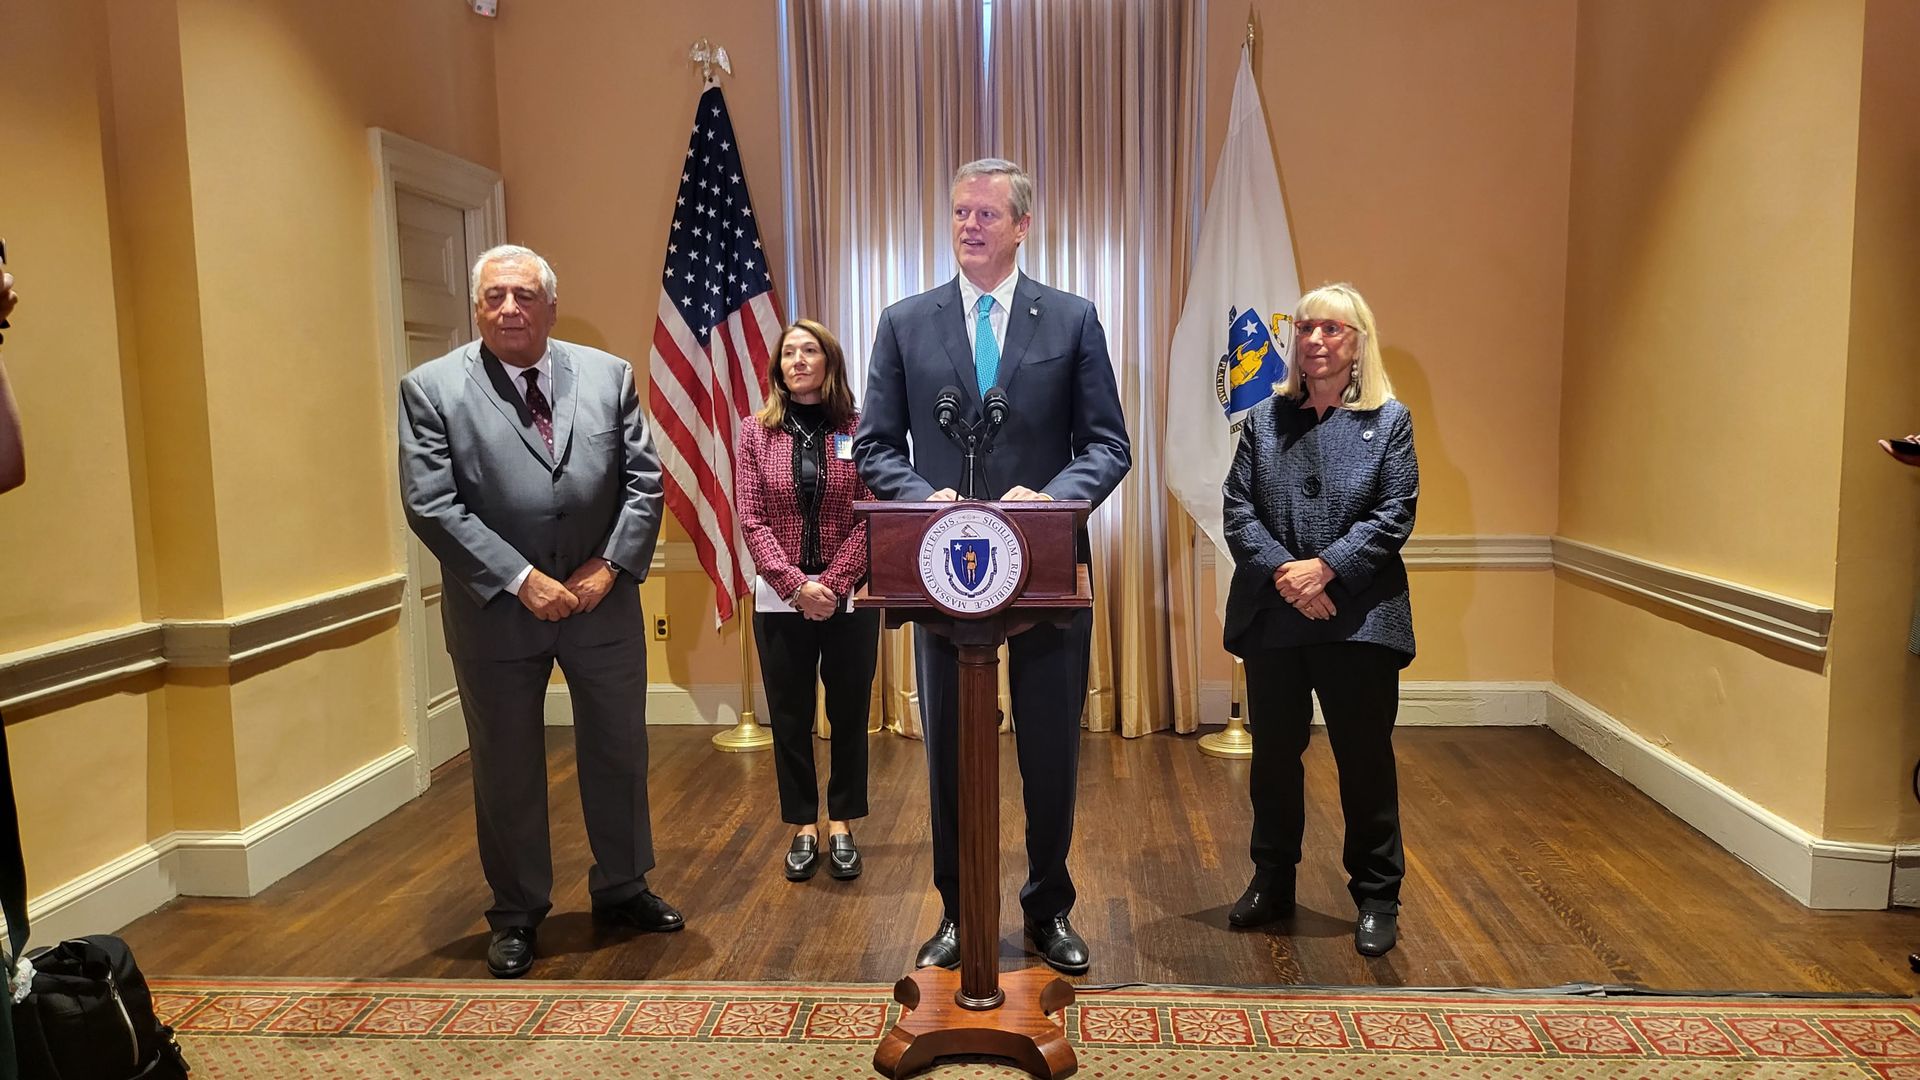 baker-not-specific-on-november-rebate-checks-for-mass-taxpayers-axios-boston